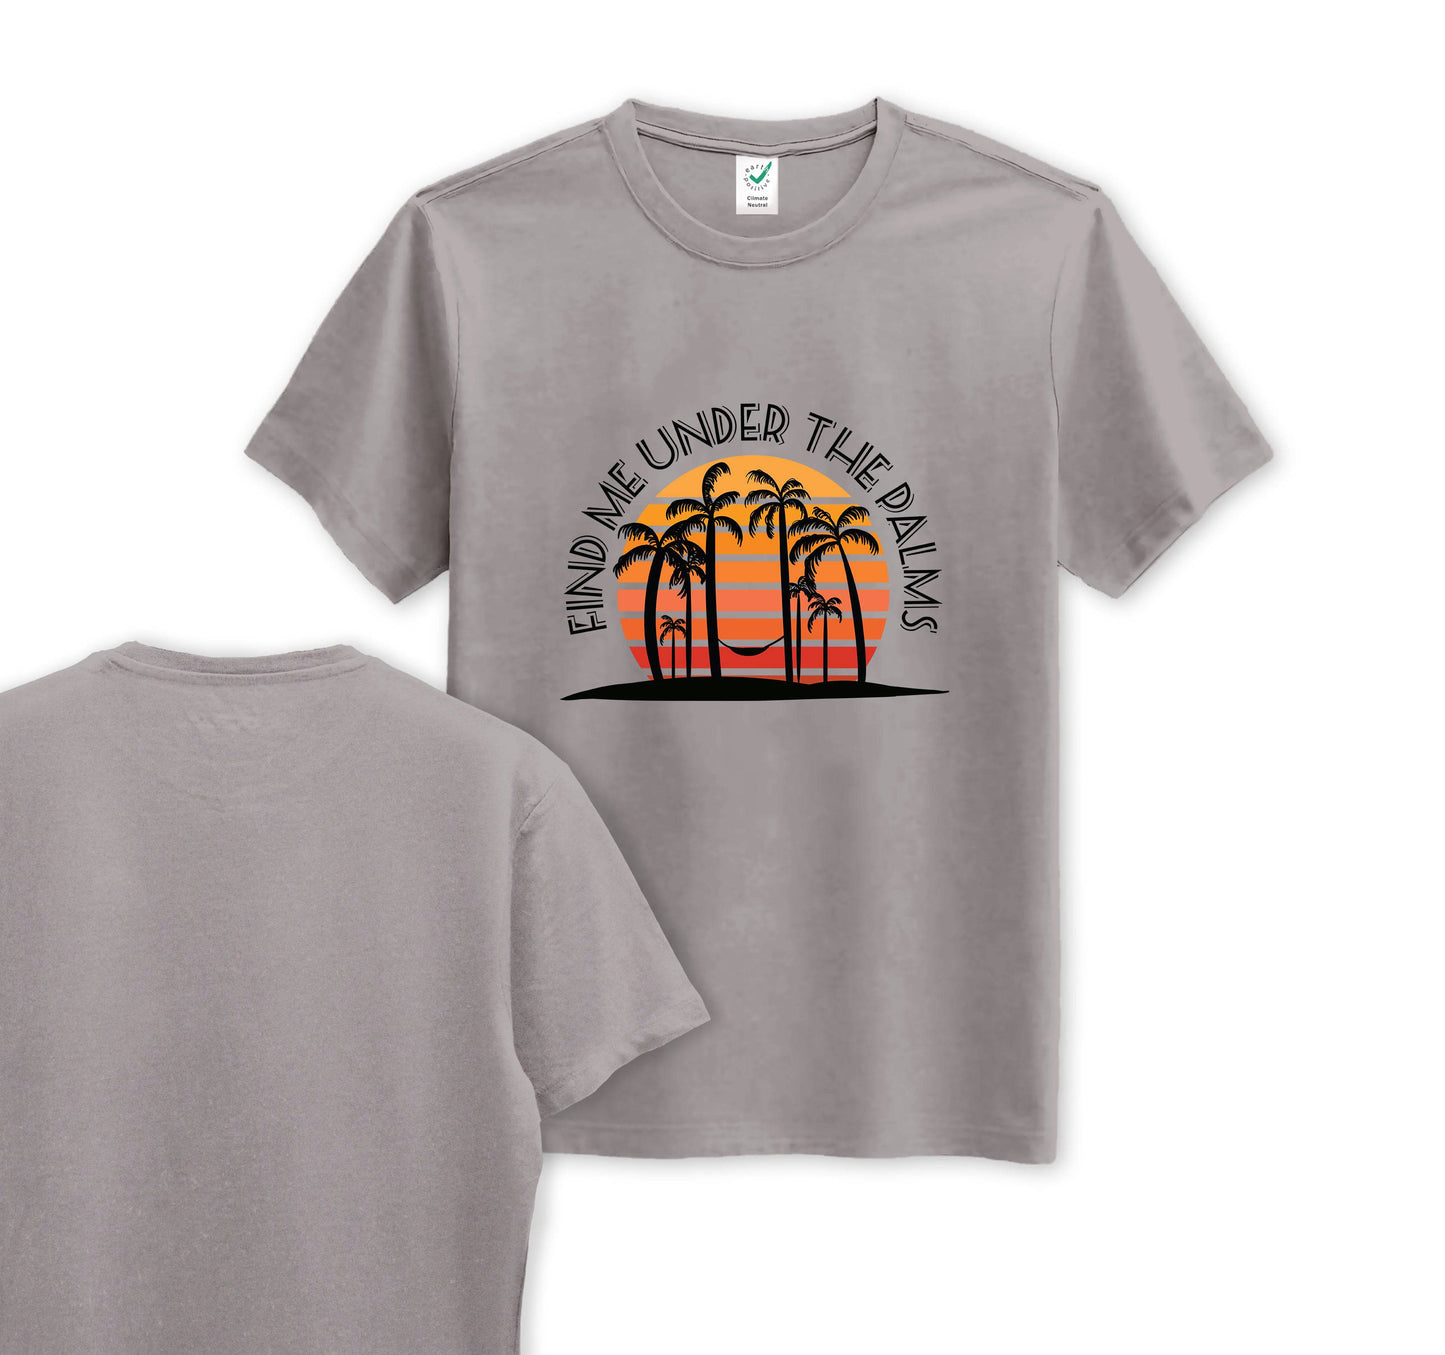 Under The Palms - Organic Cotton Tee - Front Print - One Choice Apparel